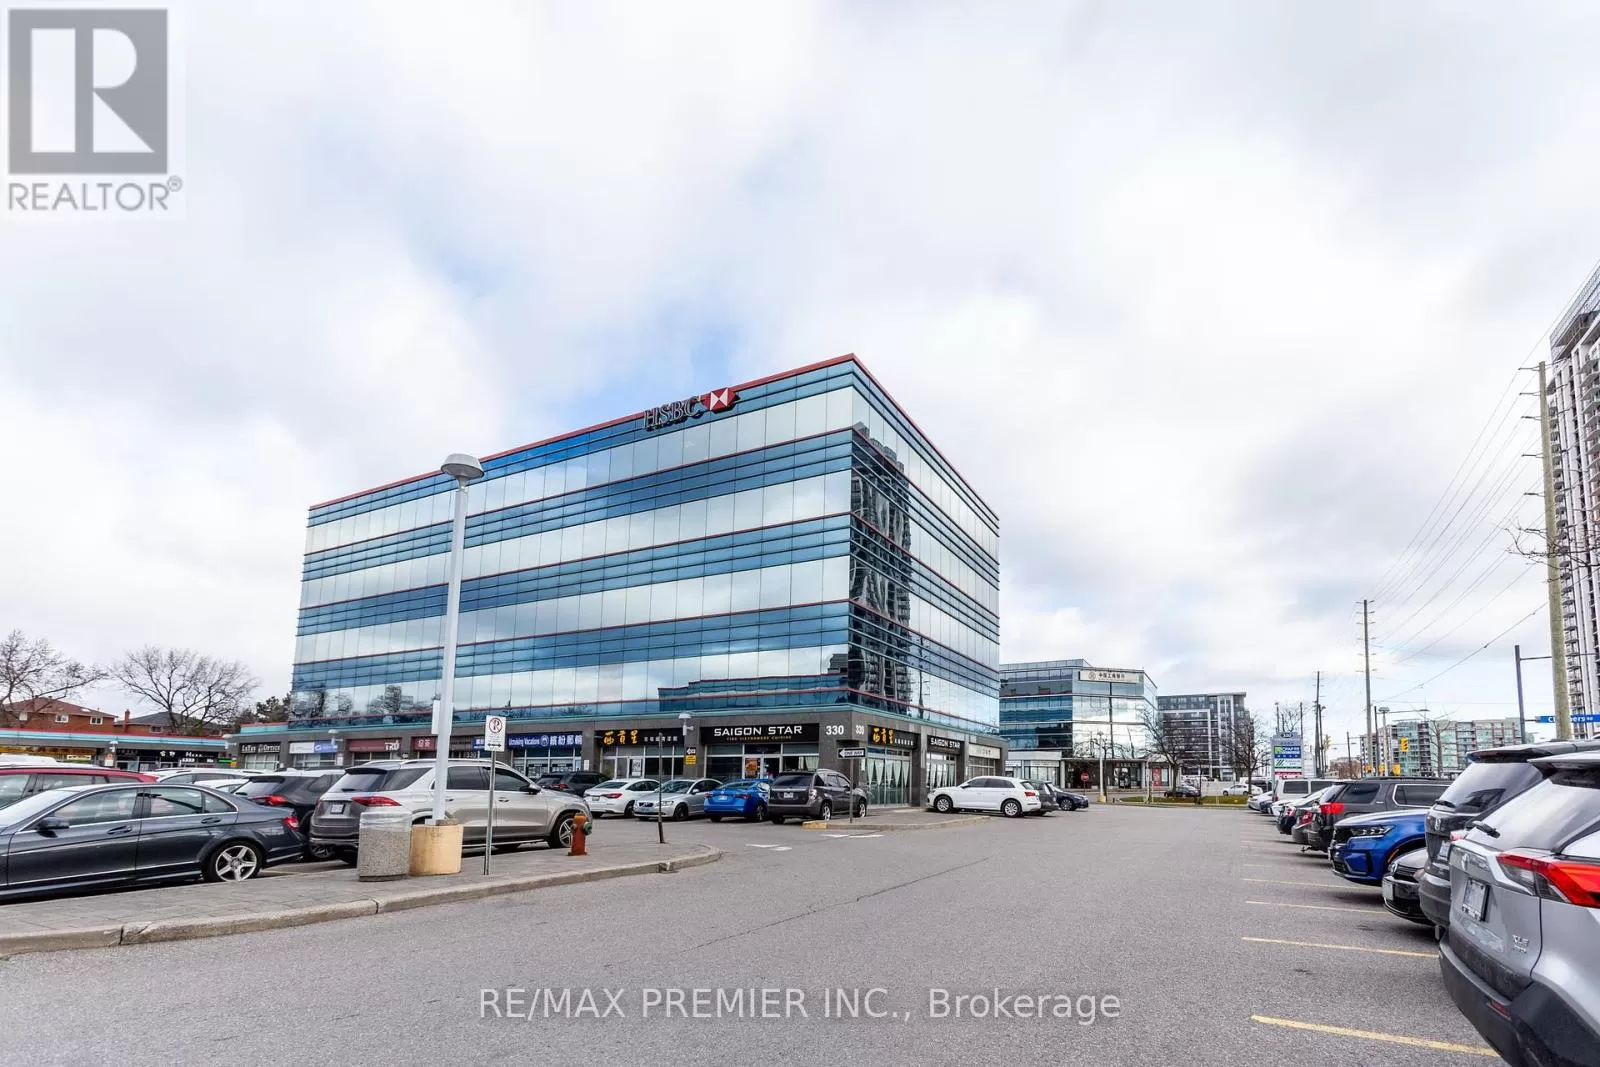 Offices for rent: 305-f - 330 Highway 7 East, Richmond Hill, Ontario L4B 3P8